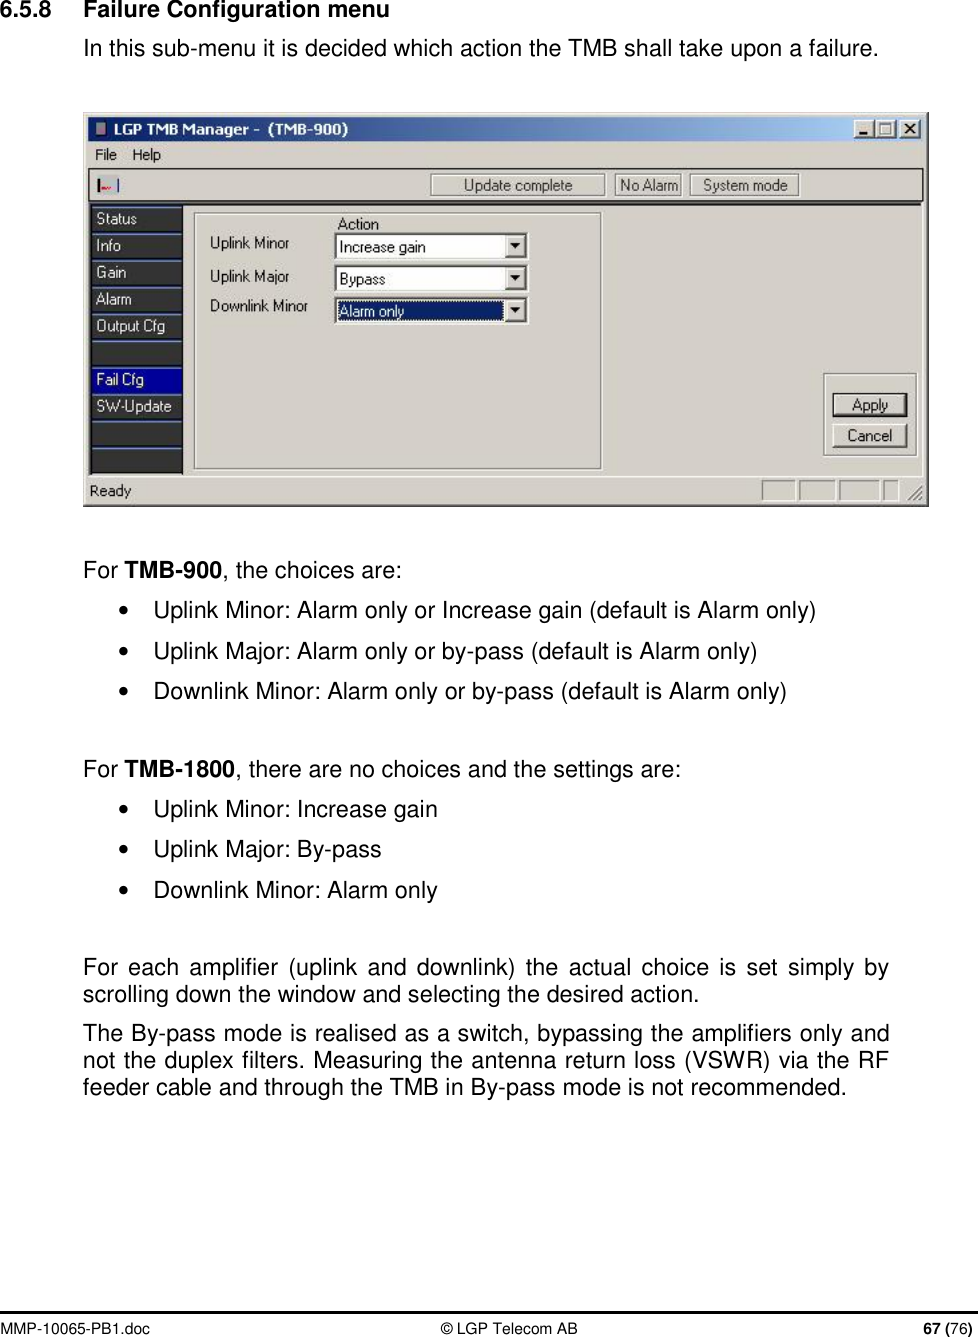  MMP-10065-PB1.doc  © LGP Telecom AB  67 (76)   6.5.8  Failure Configuration menu In this sub-menu it is decided which action the TMB shall take upon a failure.    For TMB-900, the choices are: • Uplink Minor: Alarm only or Increase gain (default is Alarm only) • Uplink Major: Alarm only or by-pass (default is Alarm only) • Downlink Minor: Alarm only or by-pass (default is Alarm only)  For TMB-1800, there are no choices and the settings are: •  Uplink Minor: Increase gain • Uplink Major: By-pass  •  Downlink Minor: Alarm only   For each amplifier (uplink and downlink) the actual choice is set simply by scrolling down the window and selecting the desired action. The By-pass mode is realised as a switch, bypassing the amplifiers only and not the duplex filters. Measuring the antenna return loss (VSWR) via the RF feeder cable and through the TMB in By-pass mode is not recommended.      